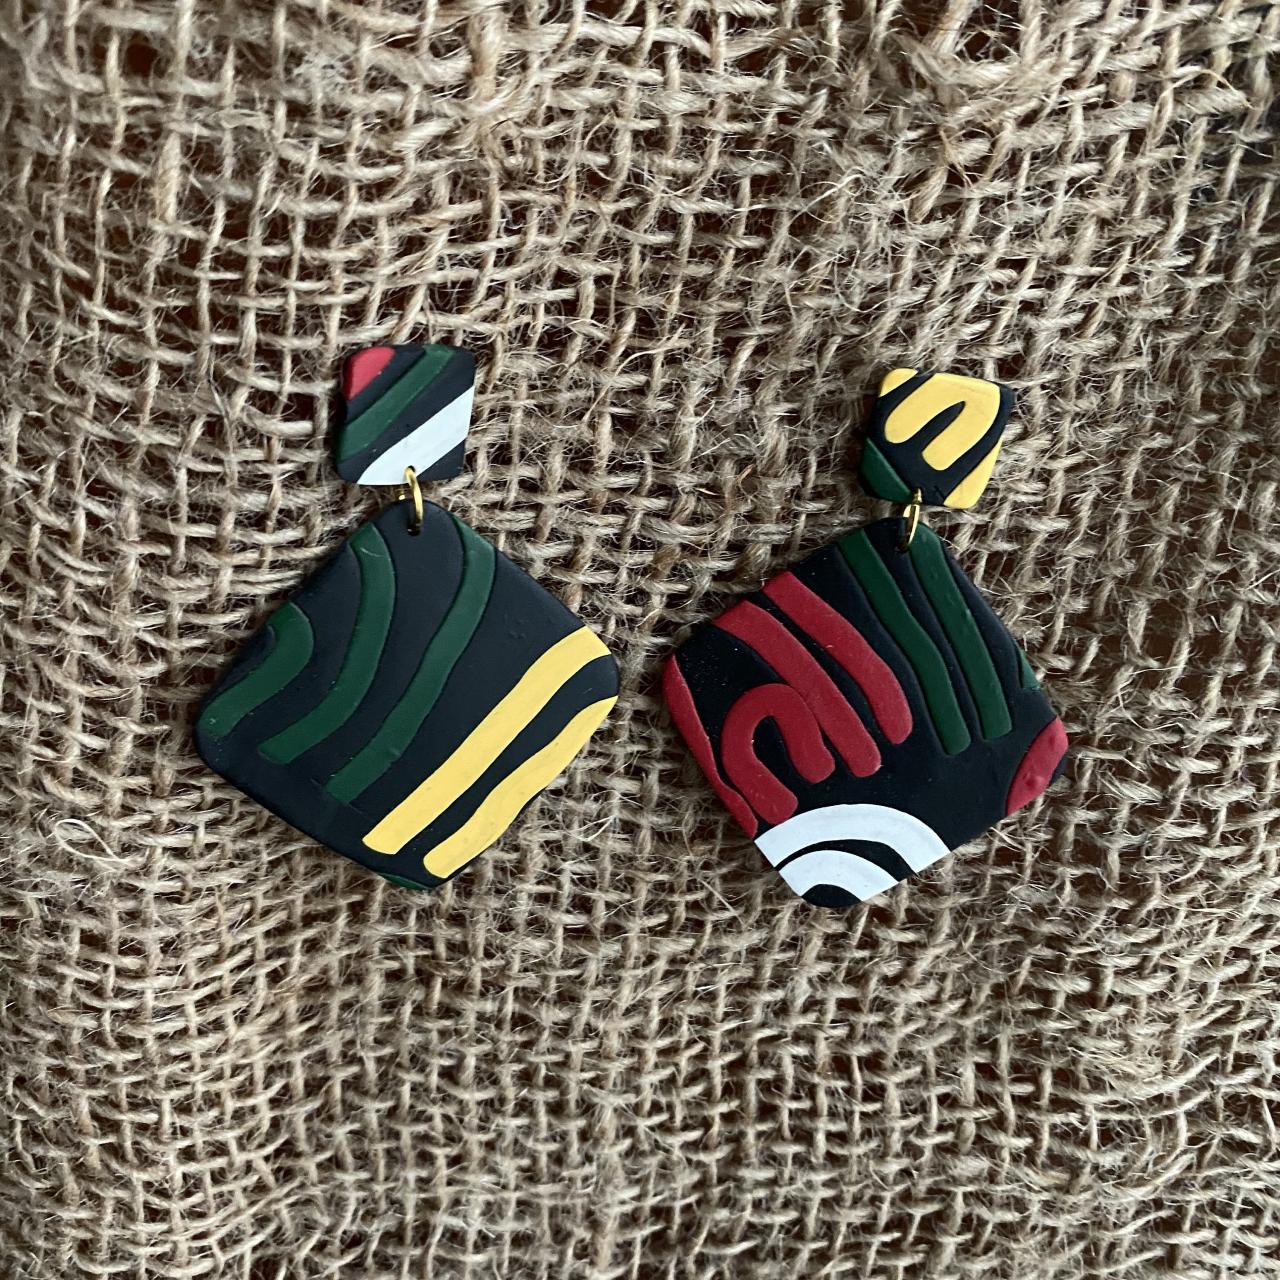 Polymer Clay Drop Earrings | Ava Polymer Clay Statement Earrings | Black | Red | Forest Green | Golden Life Yellow | White | Handmade Polymer